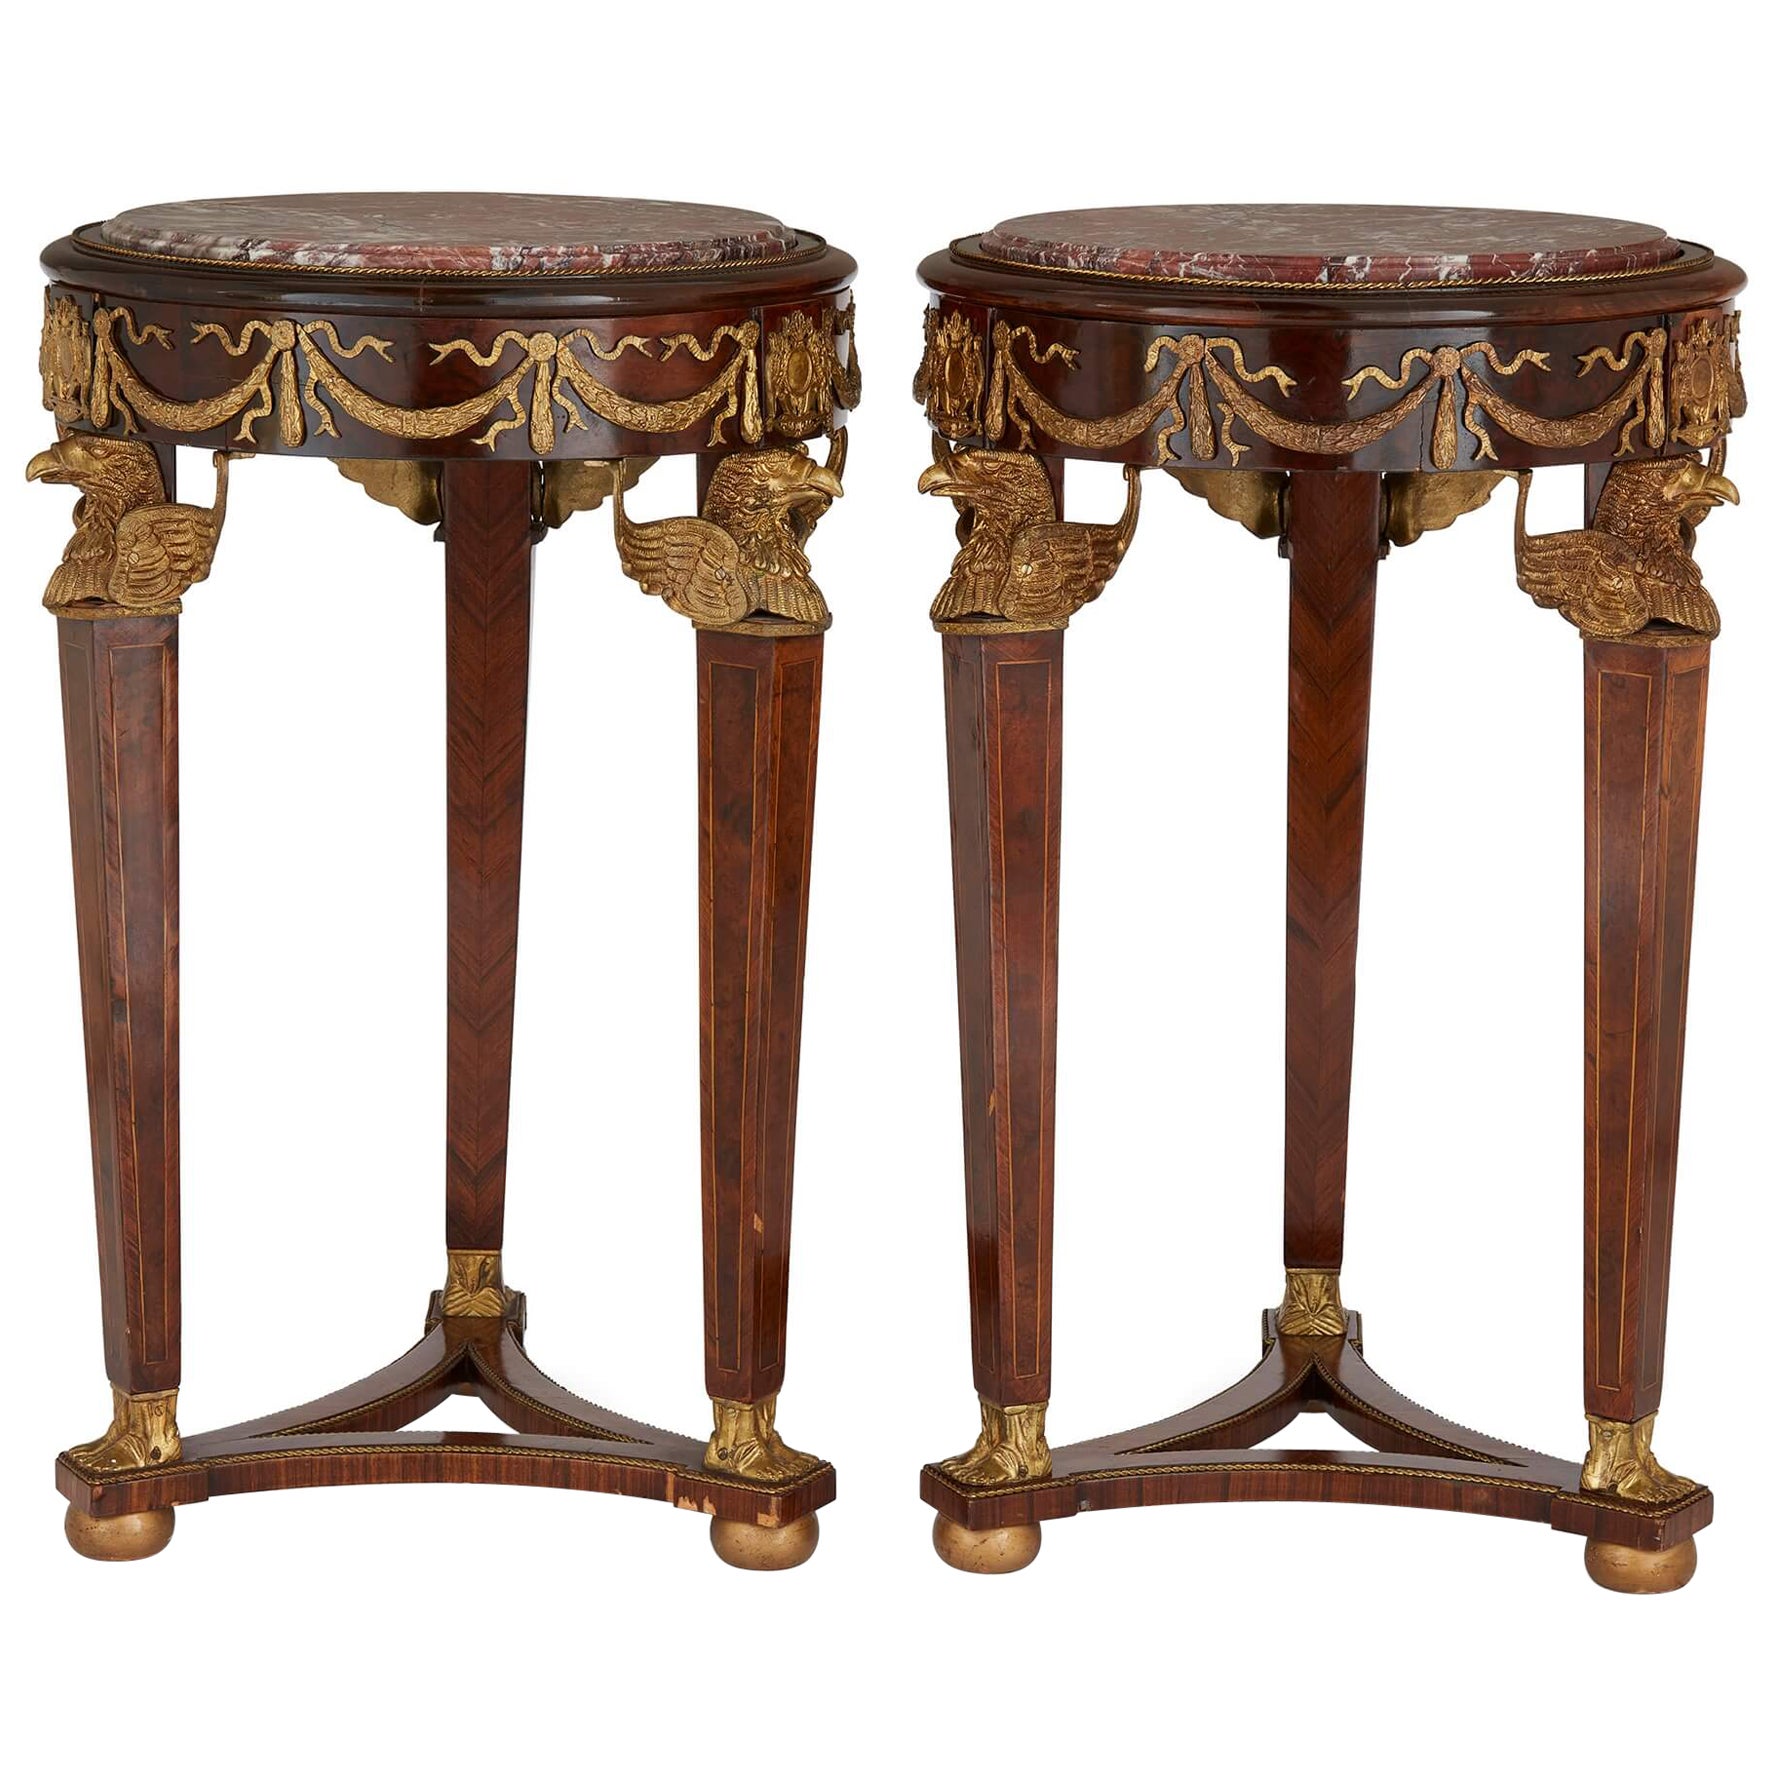 Pair of French Empire Style Ormolu, Wood and Marble Pedestals For Sale